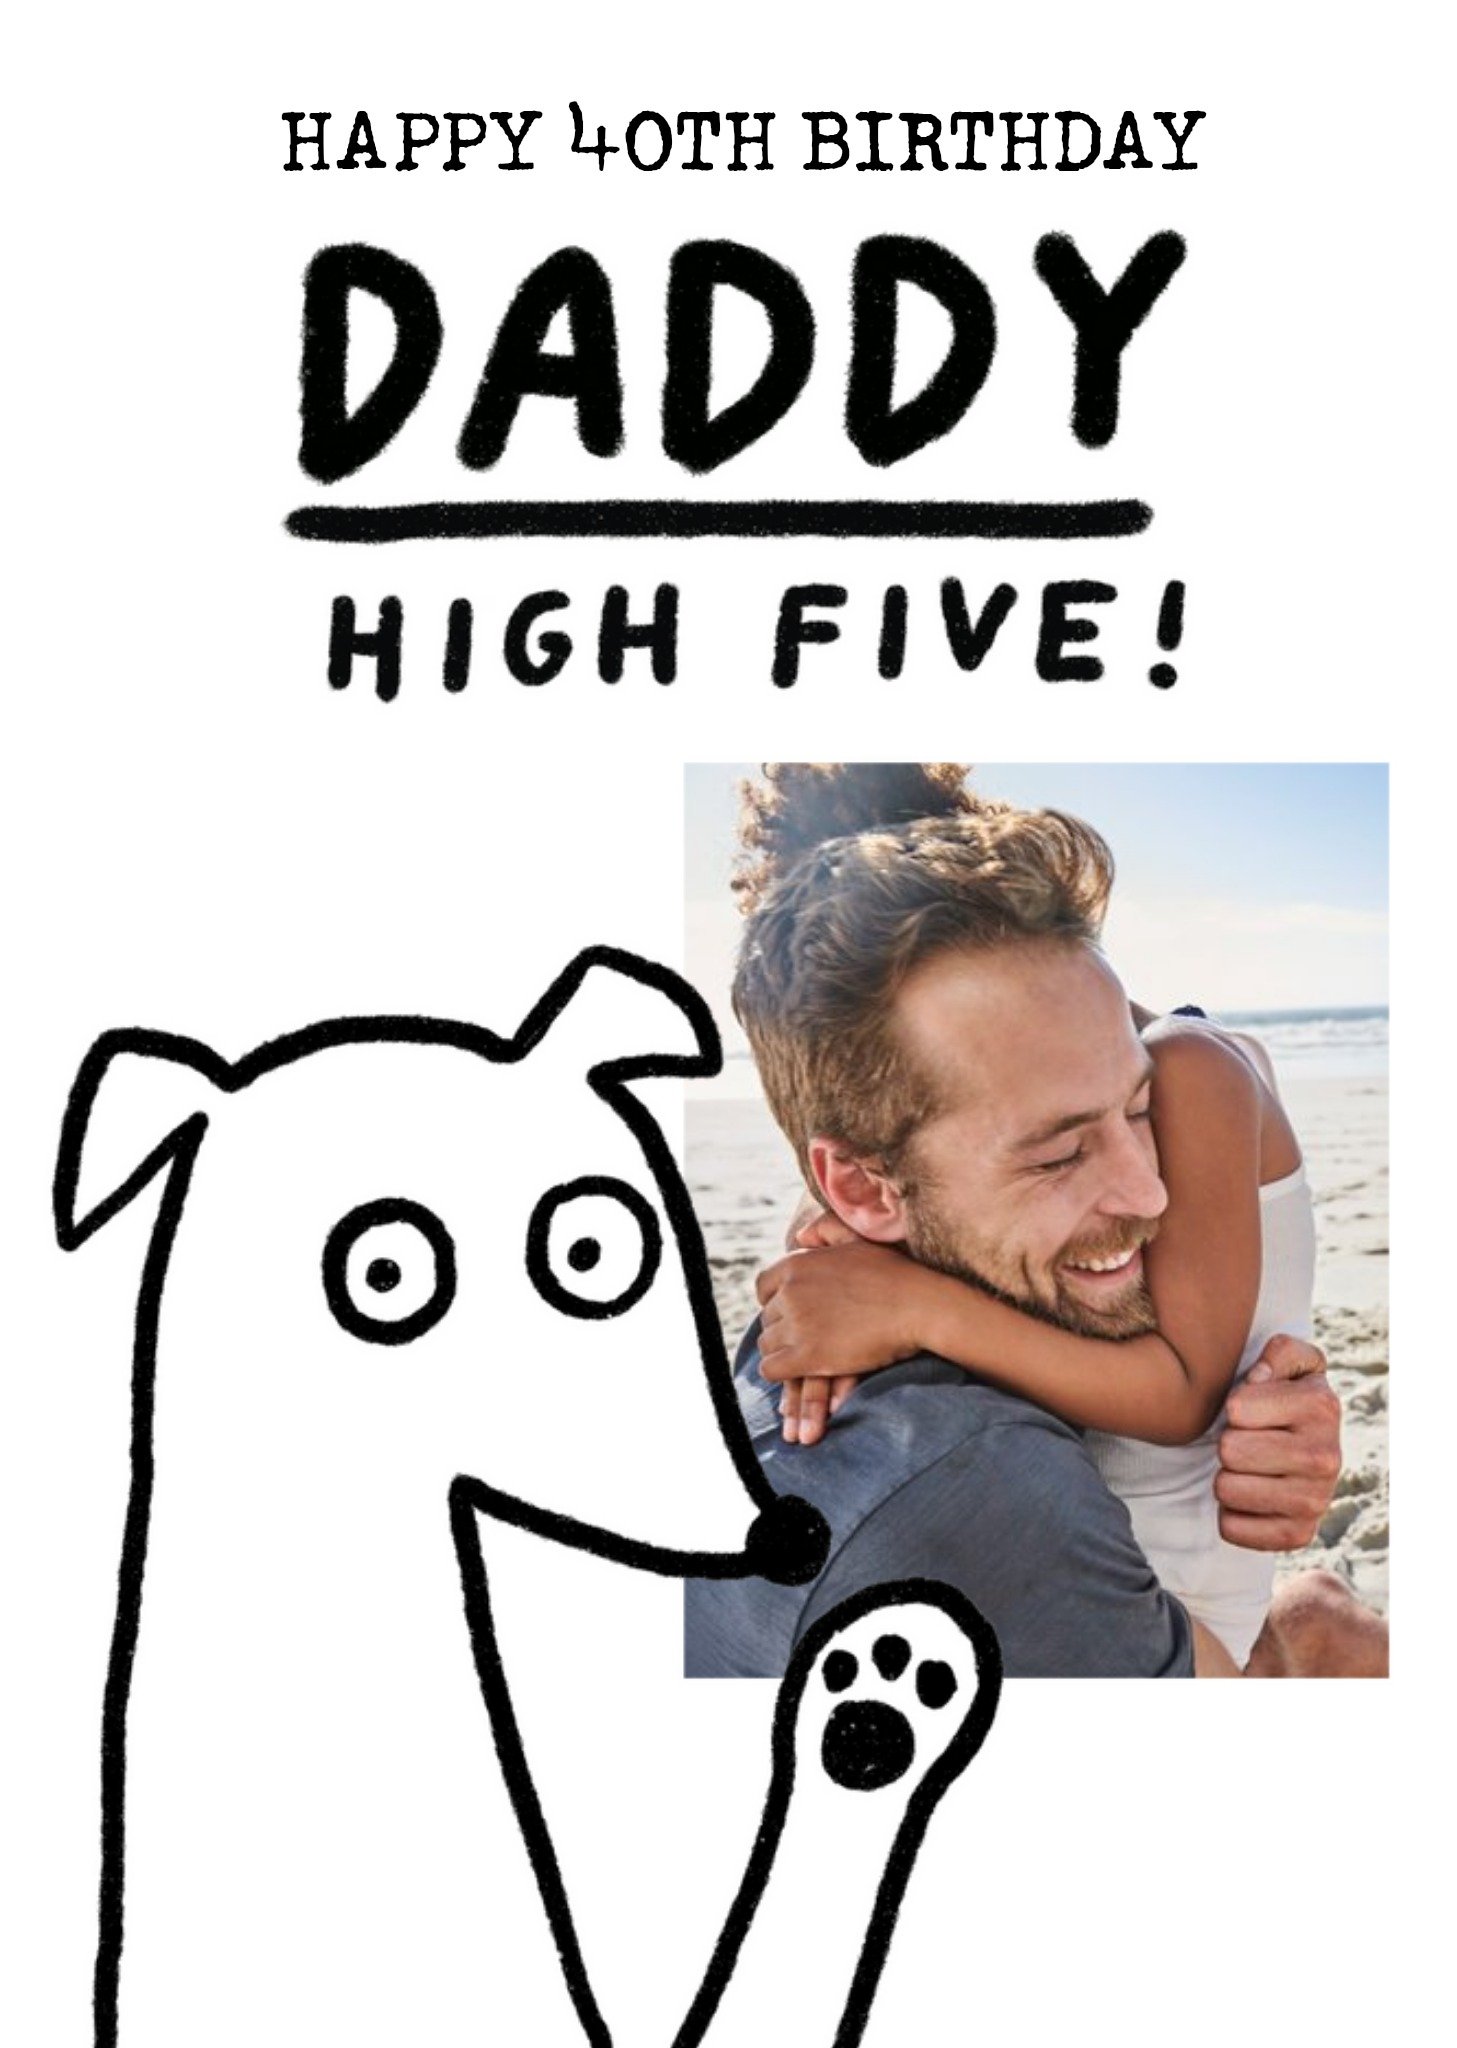 Moonpig Illustration Of A Dog High Fiving Happy 40th Birthday Daddy Photo Upload Card, Large